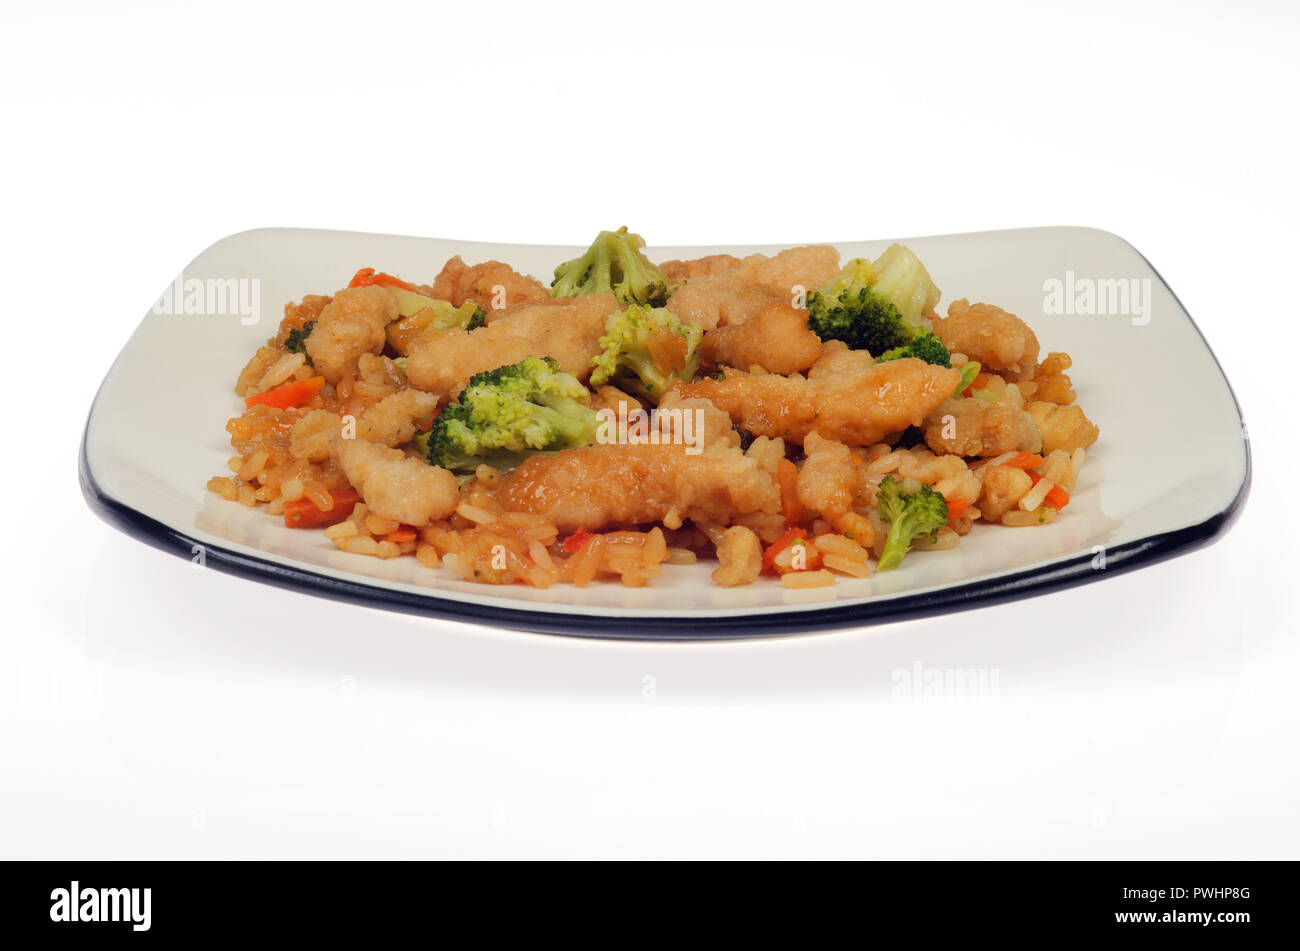 Mandarin orange chicken with vegetables and rice Stock Photo